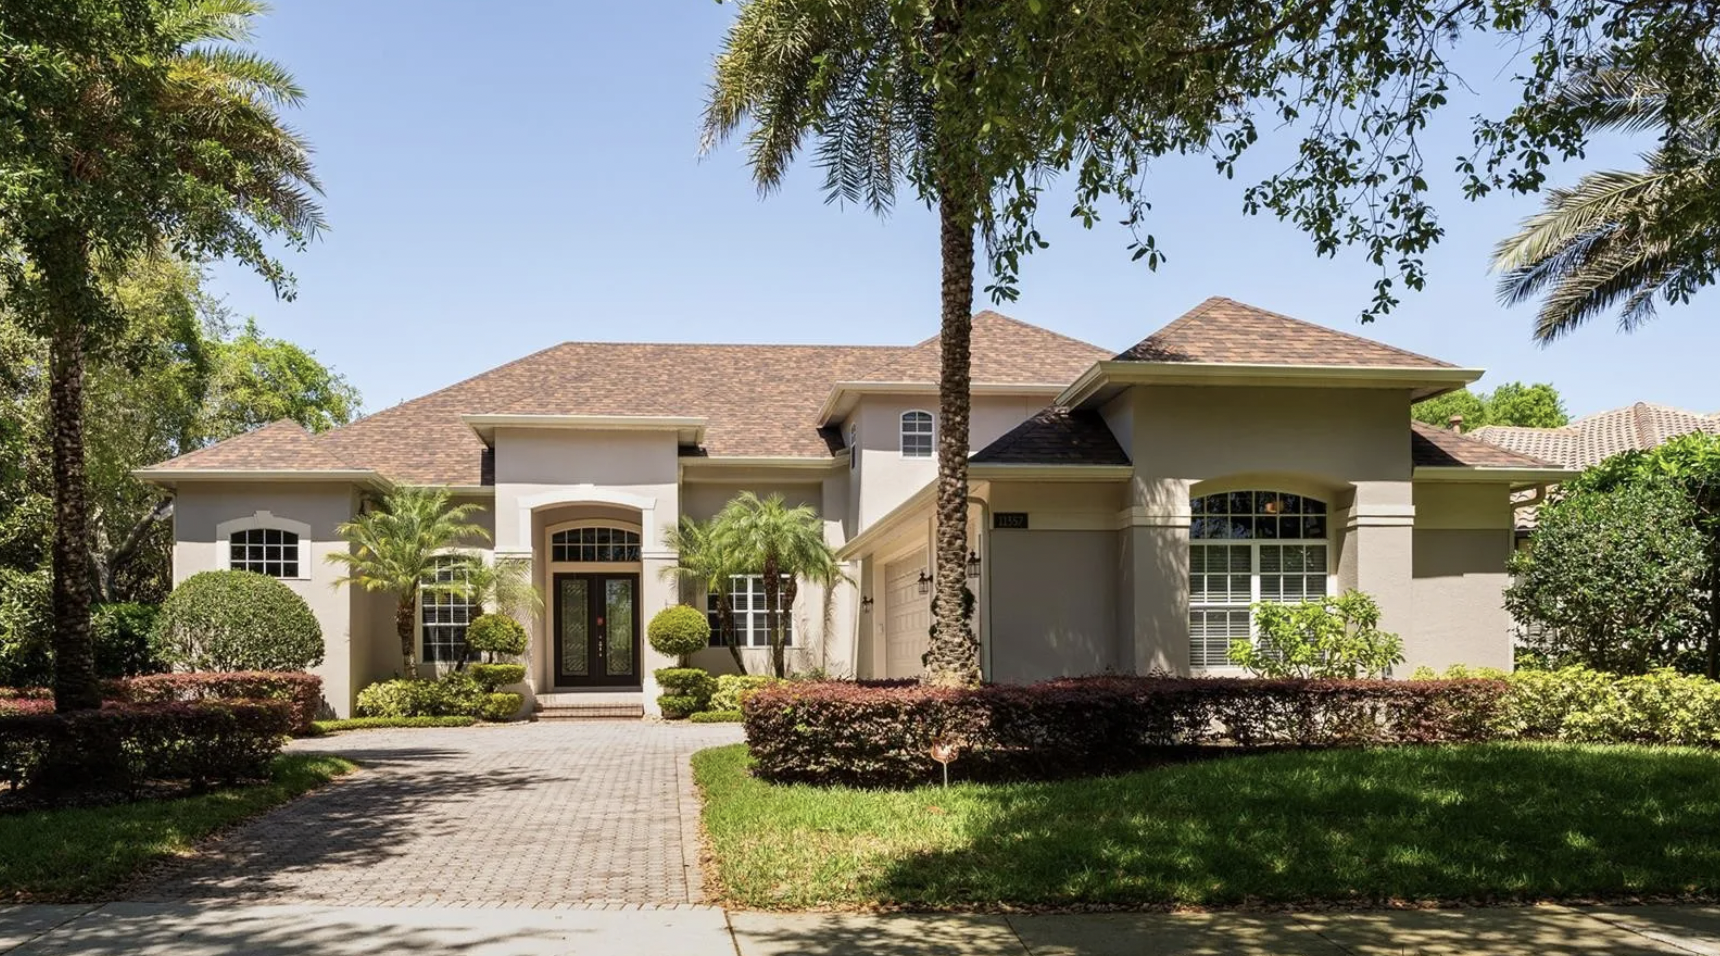 Photo of property: 11357 Preserve View Dr, Windermere, FL 34786